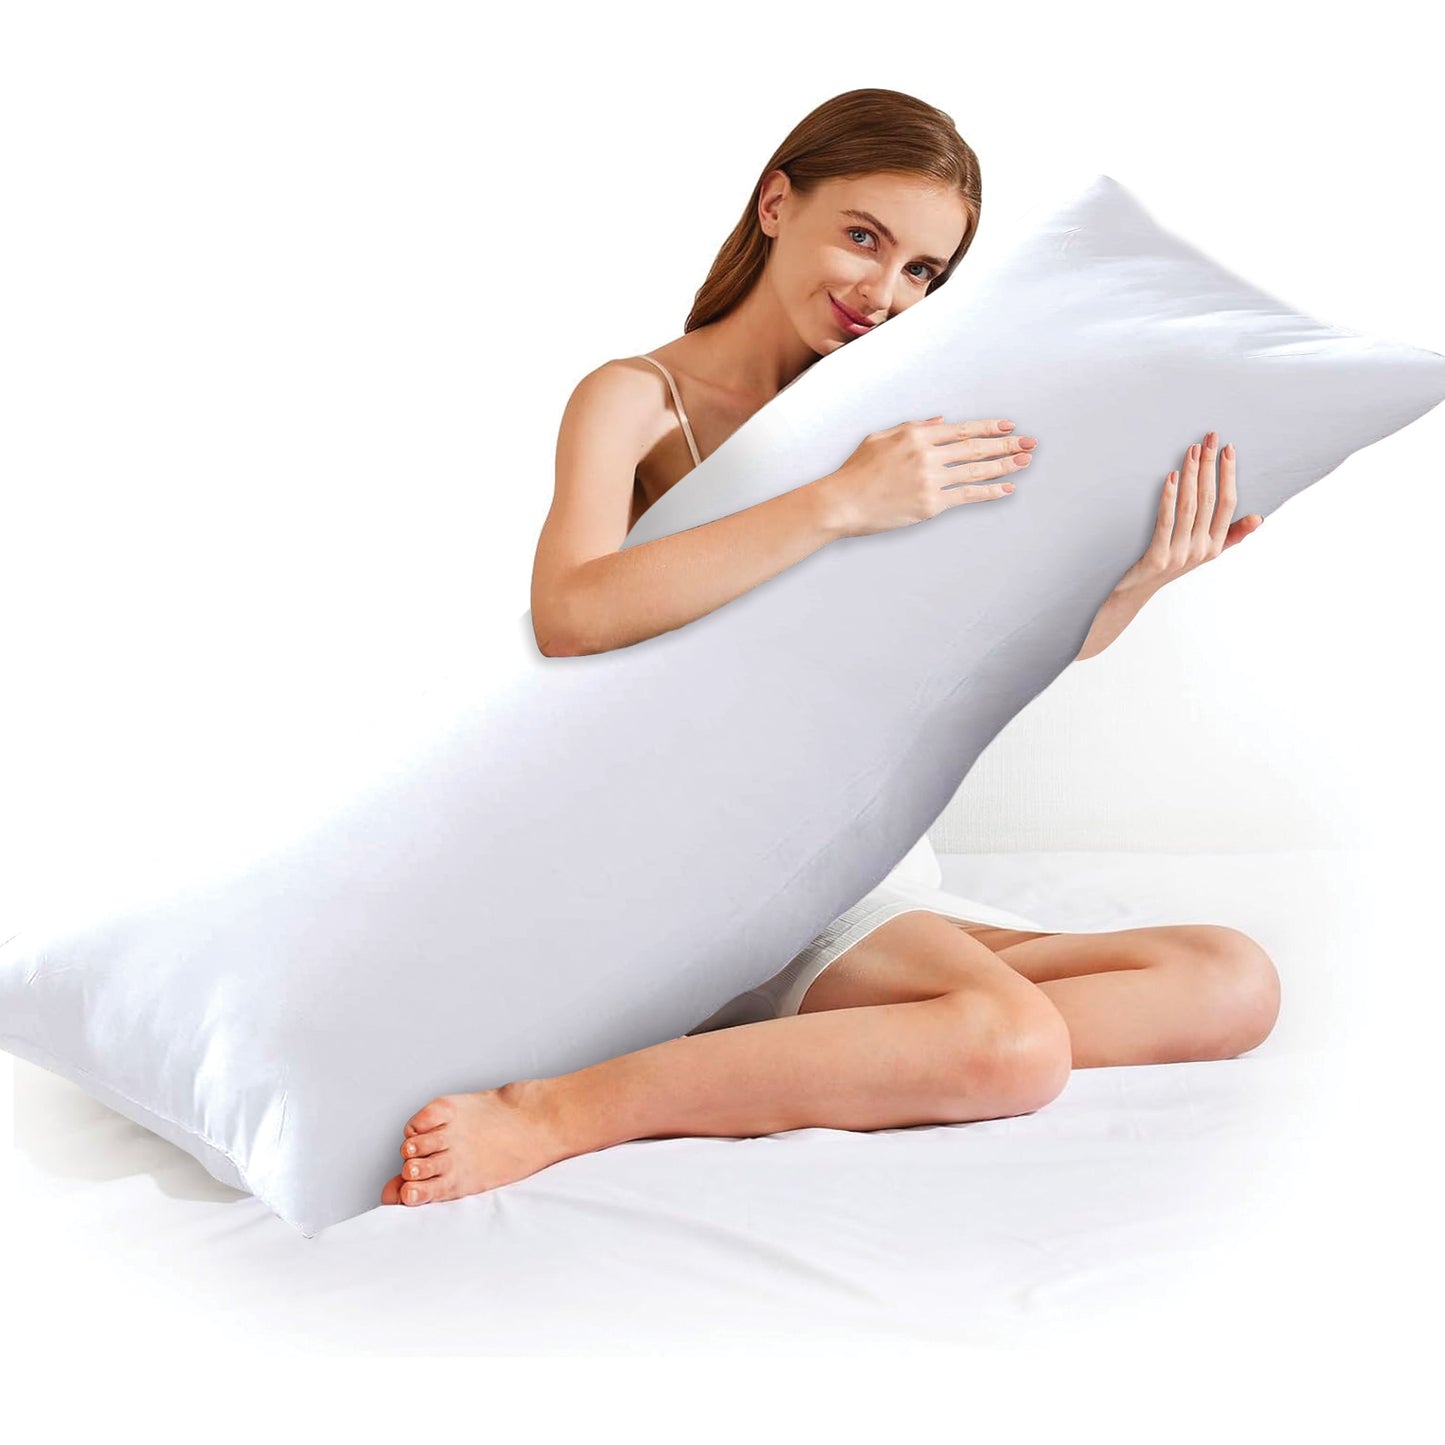 Wrapped in comfort, the woman holds a body pillow filled with an exquisite 50% down and 50% feather blend, enjoying the luxurious softness and gentle support it provides for a restful slumber